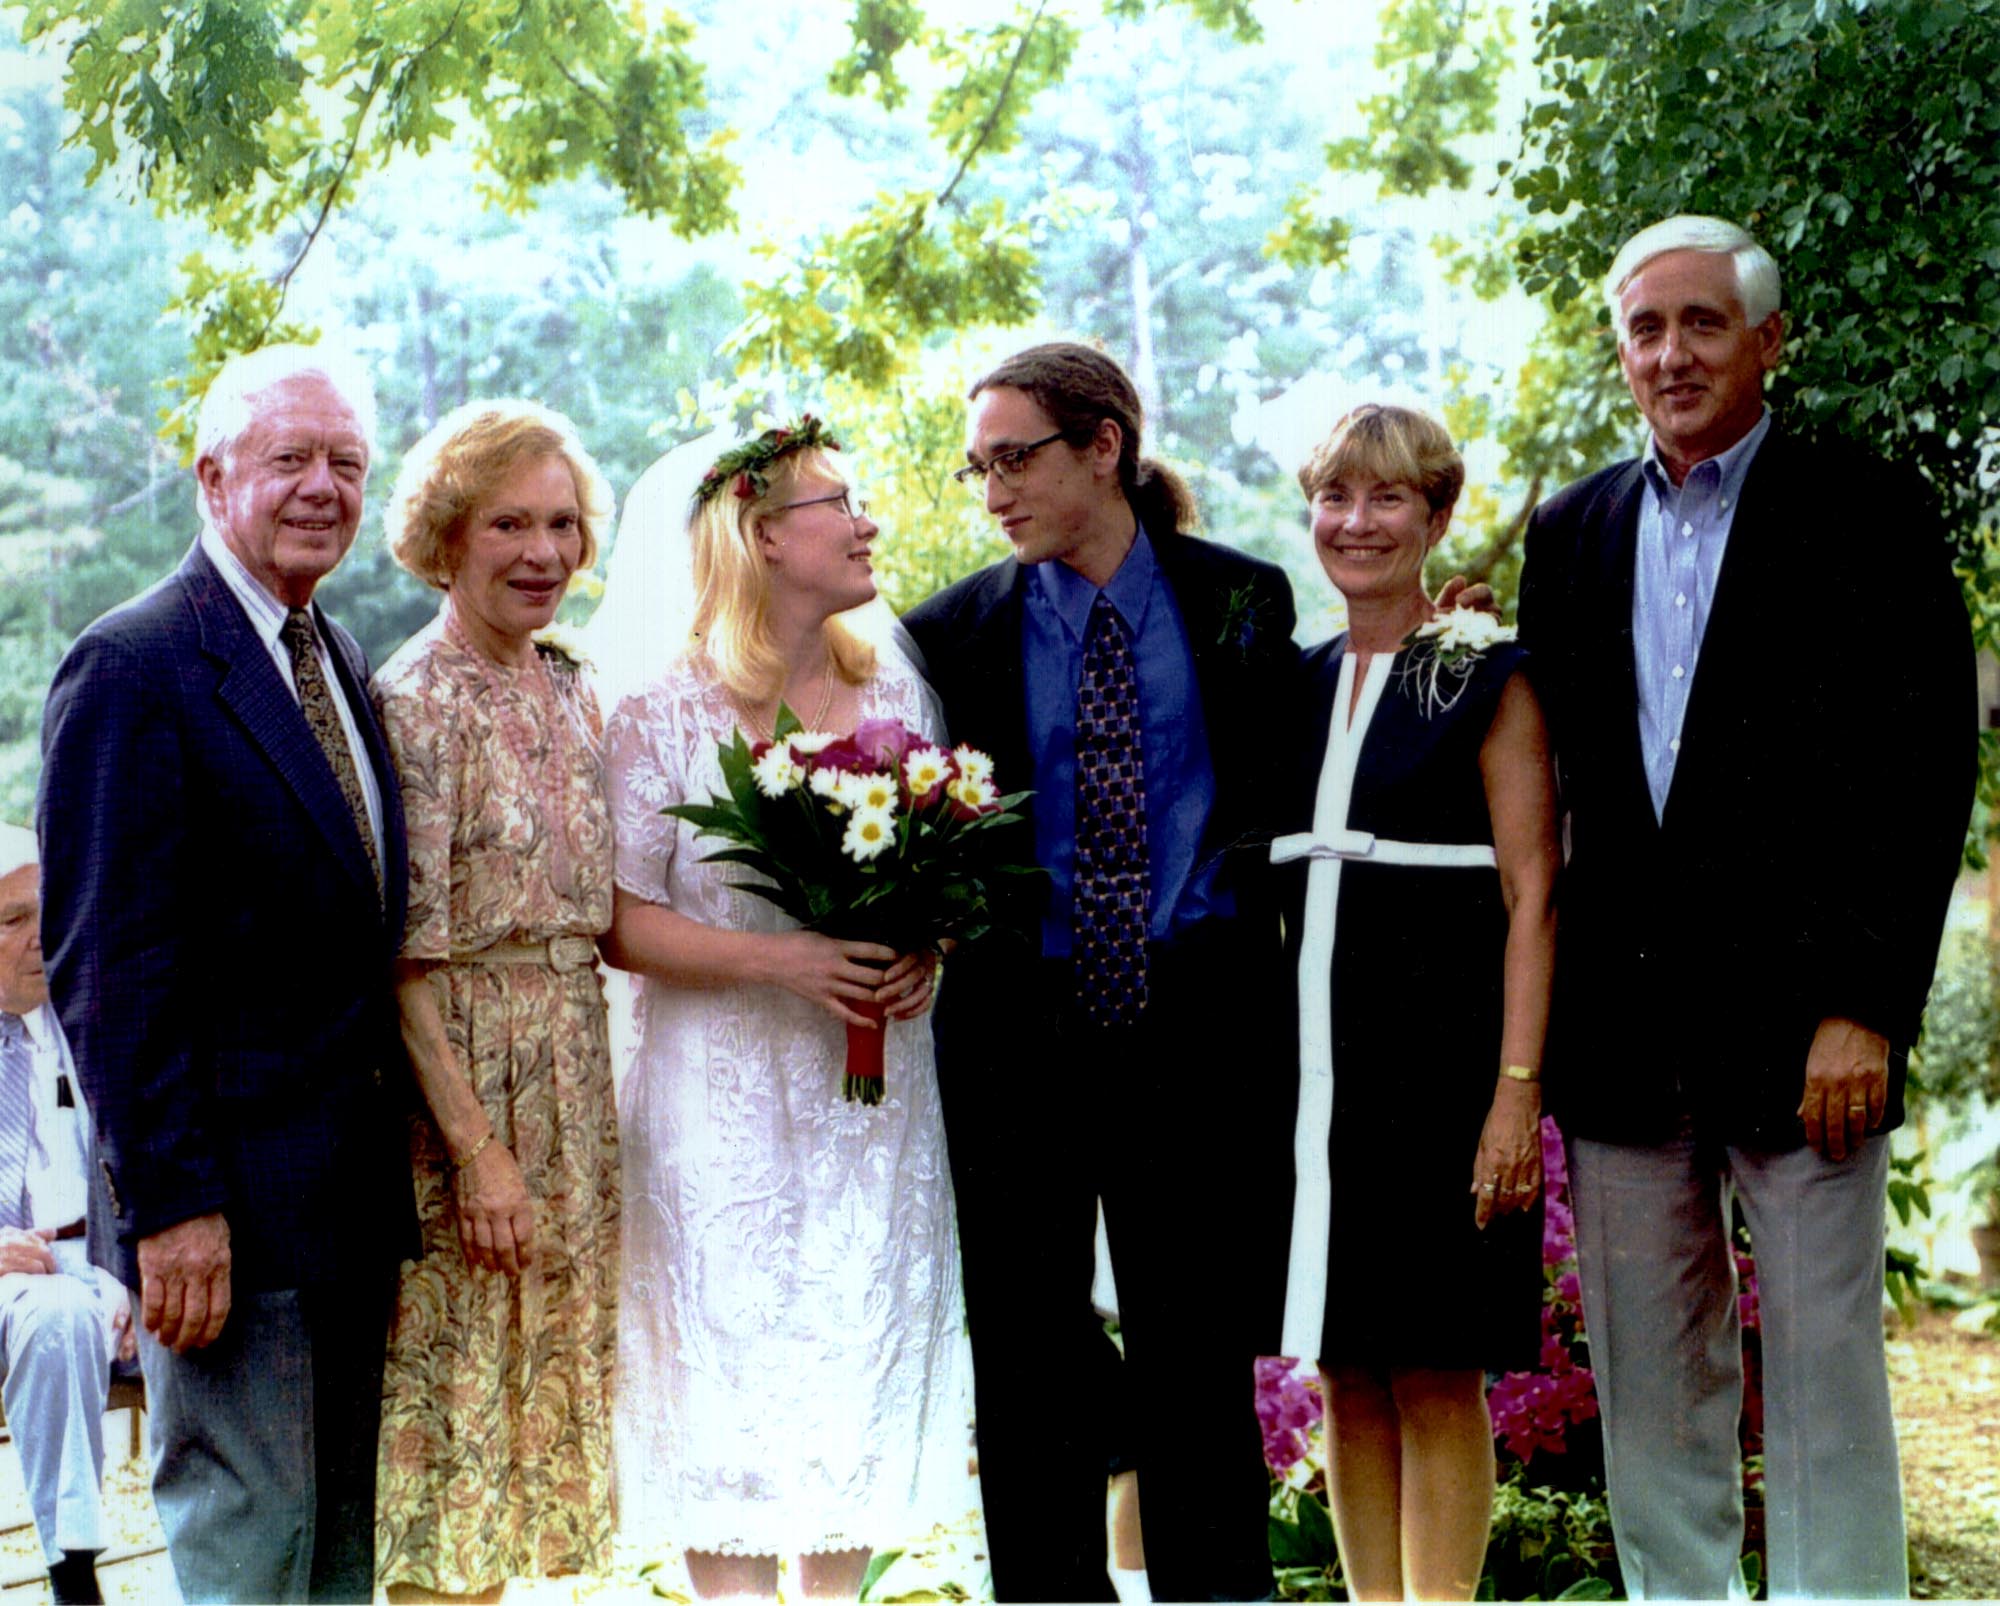 Amy Carter Weds Jim Wentzel. From L-R: Jimmy, Rosalyn, Amy Cater, Jim, Judy, And Jim Wentzel. September 1, 1996, Plains, Georgia. | Source: Getty Images